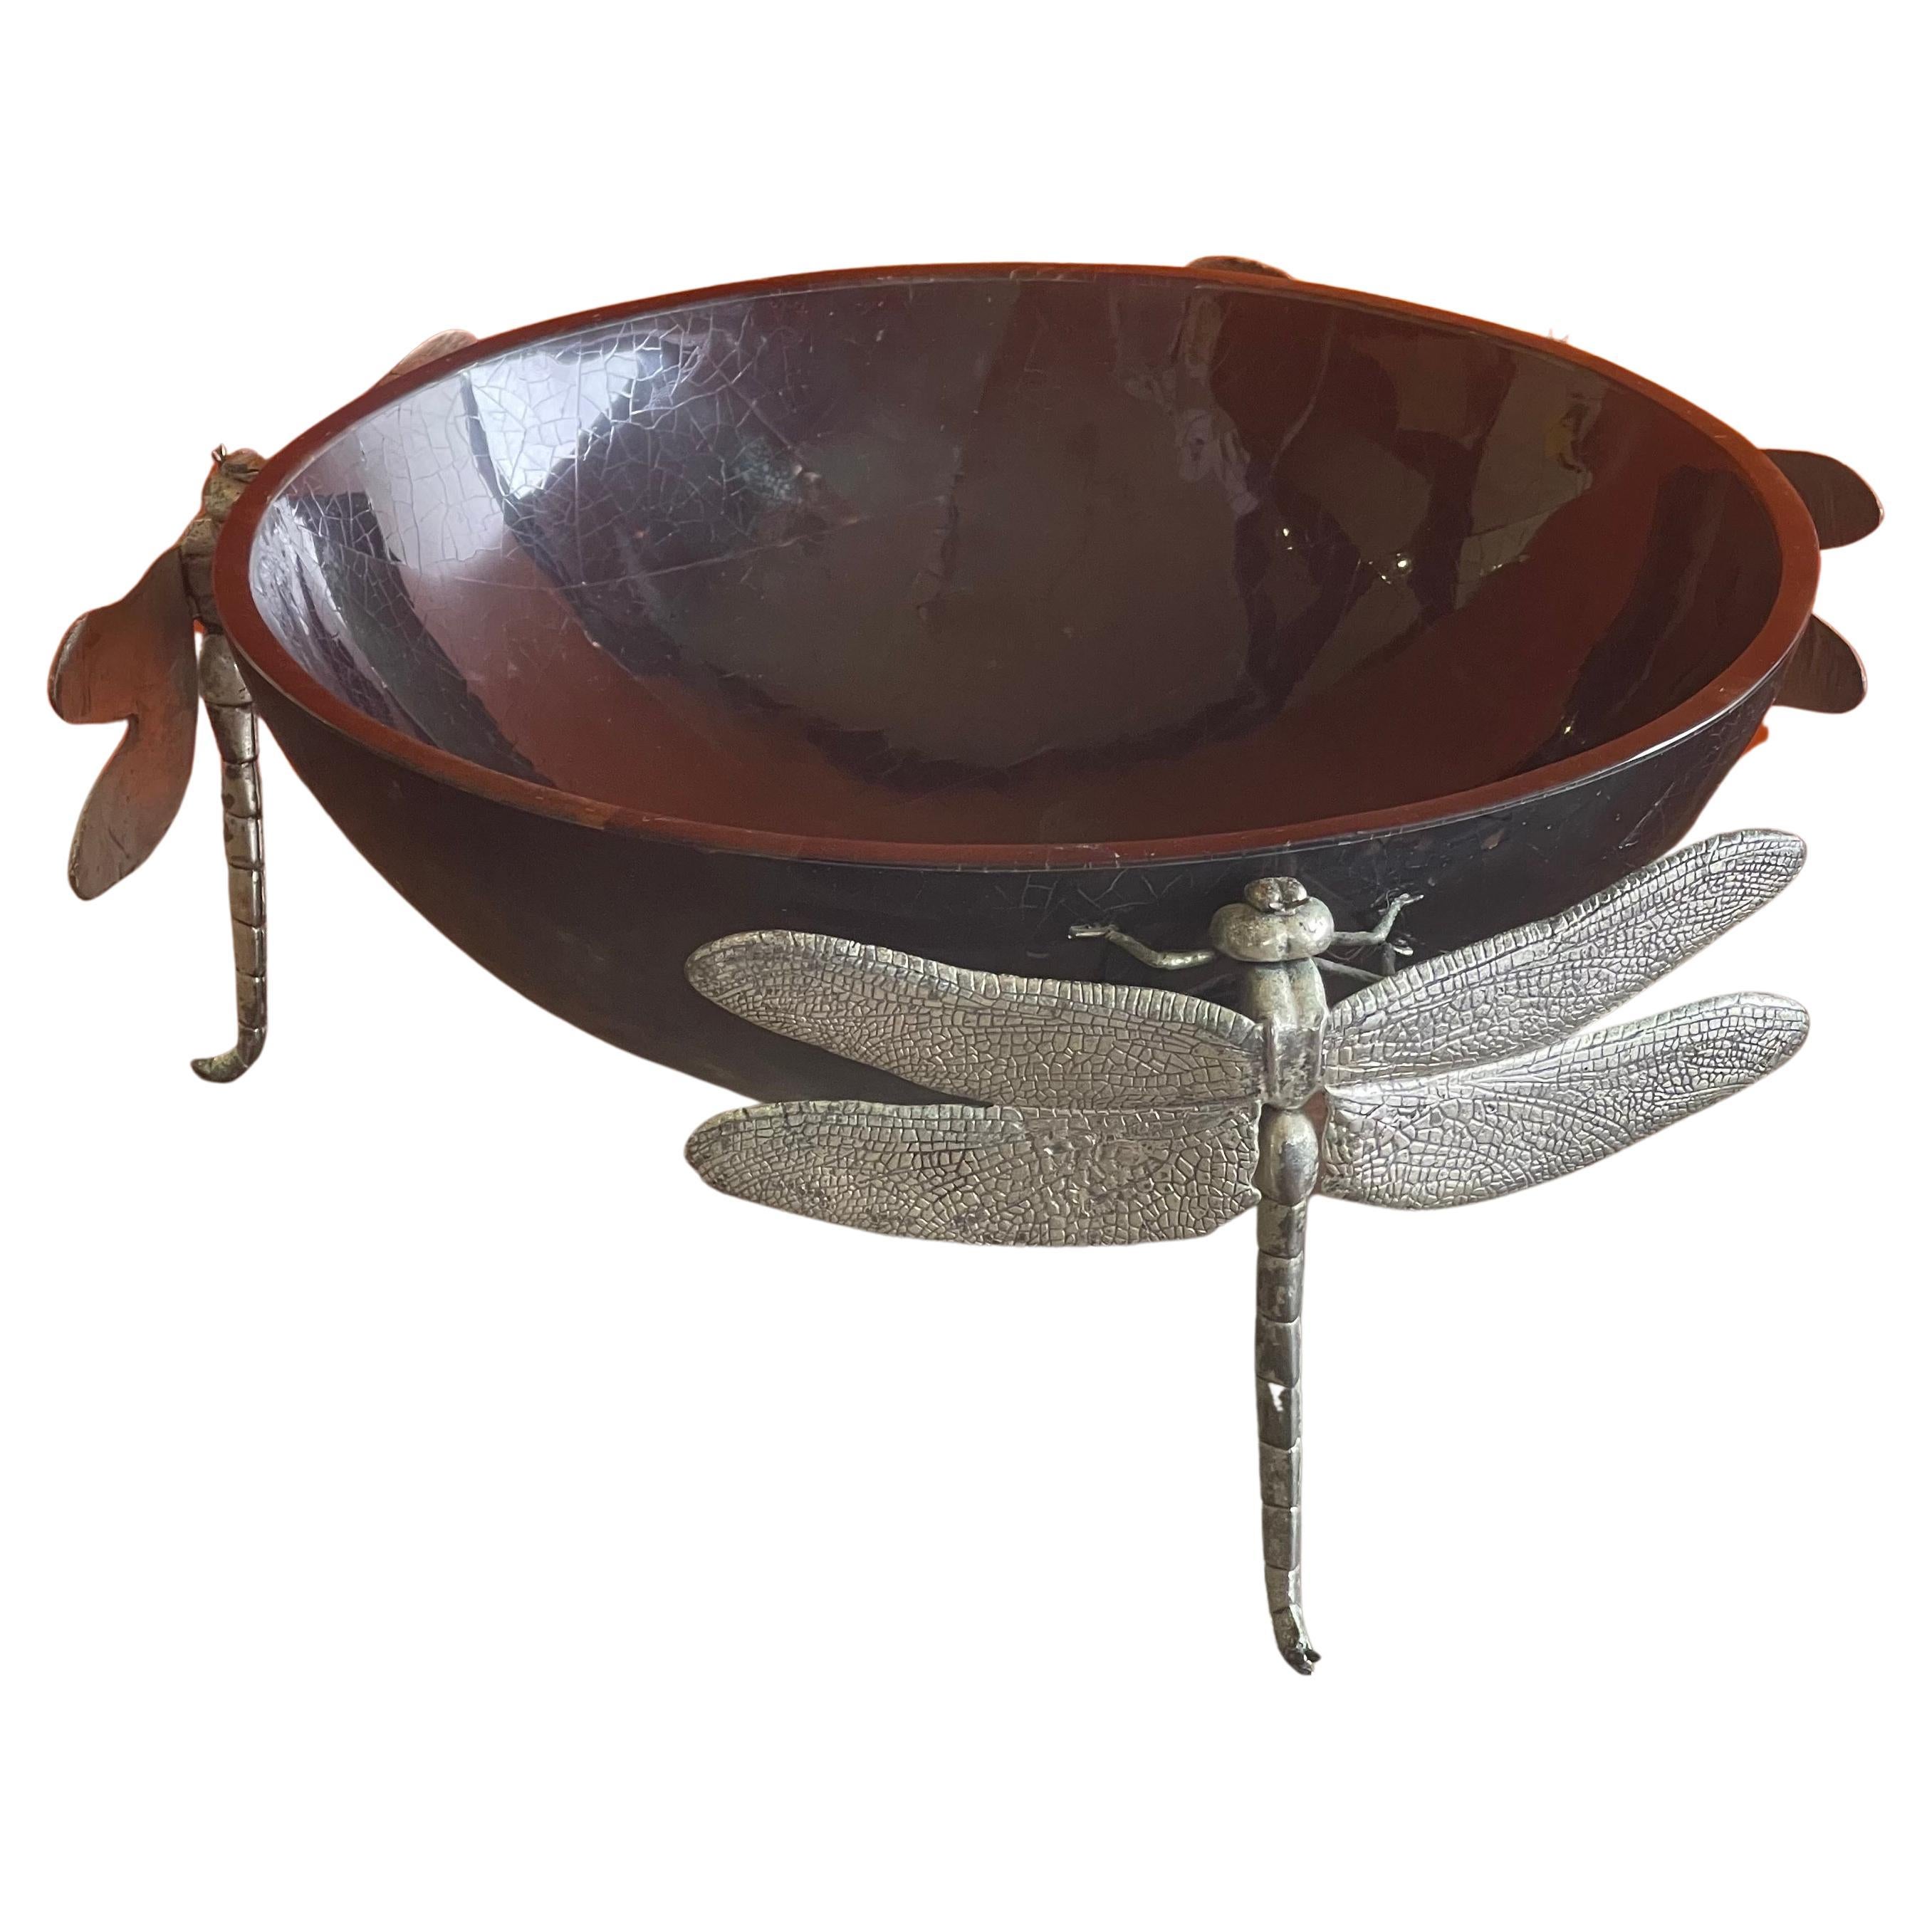 Large Black Pen Shell Centerpiece Bowl with Dragonfly Feet